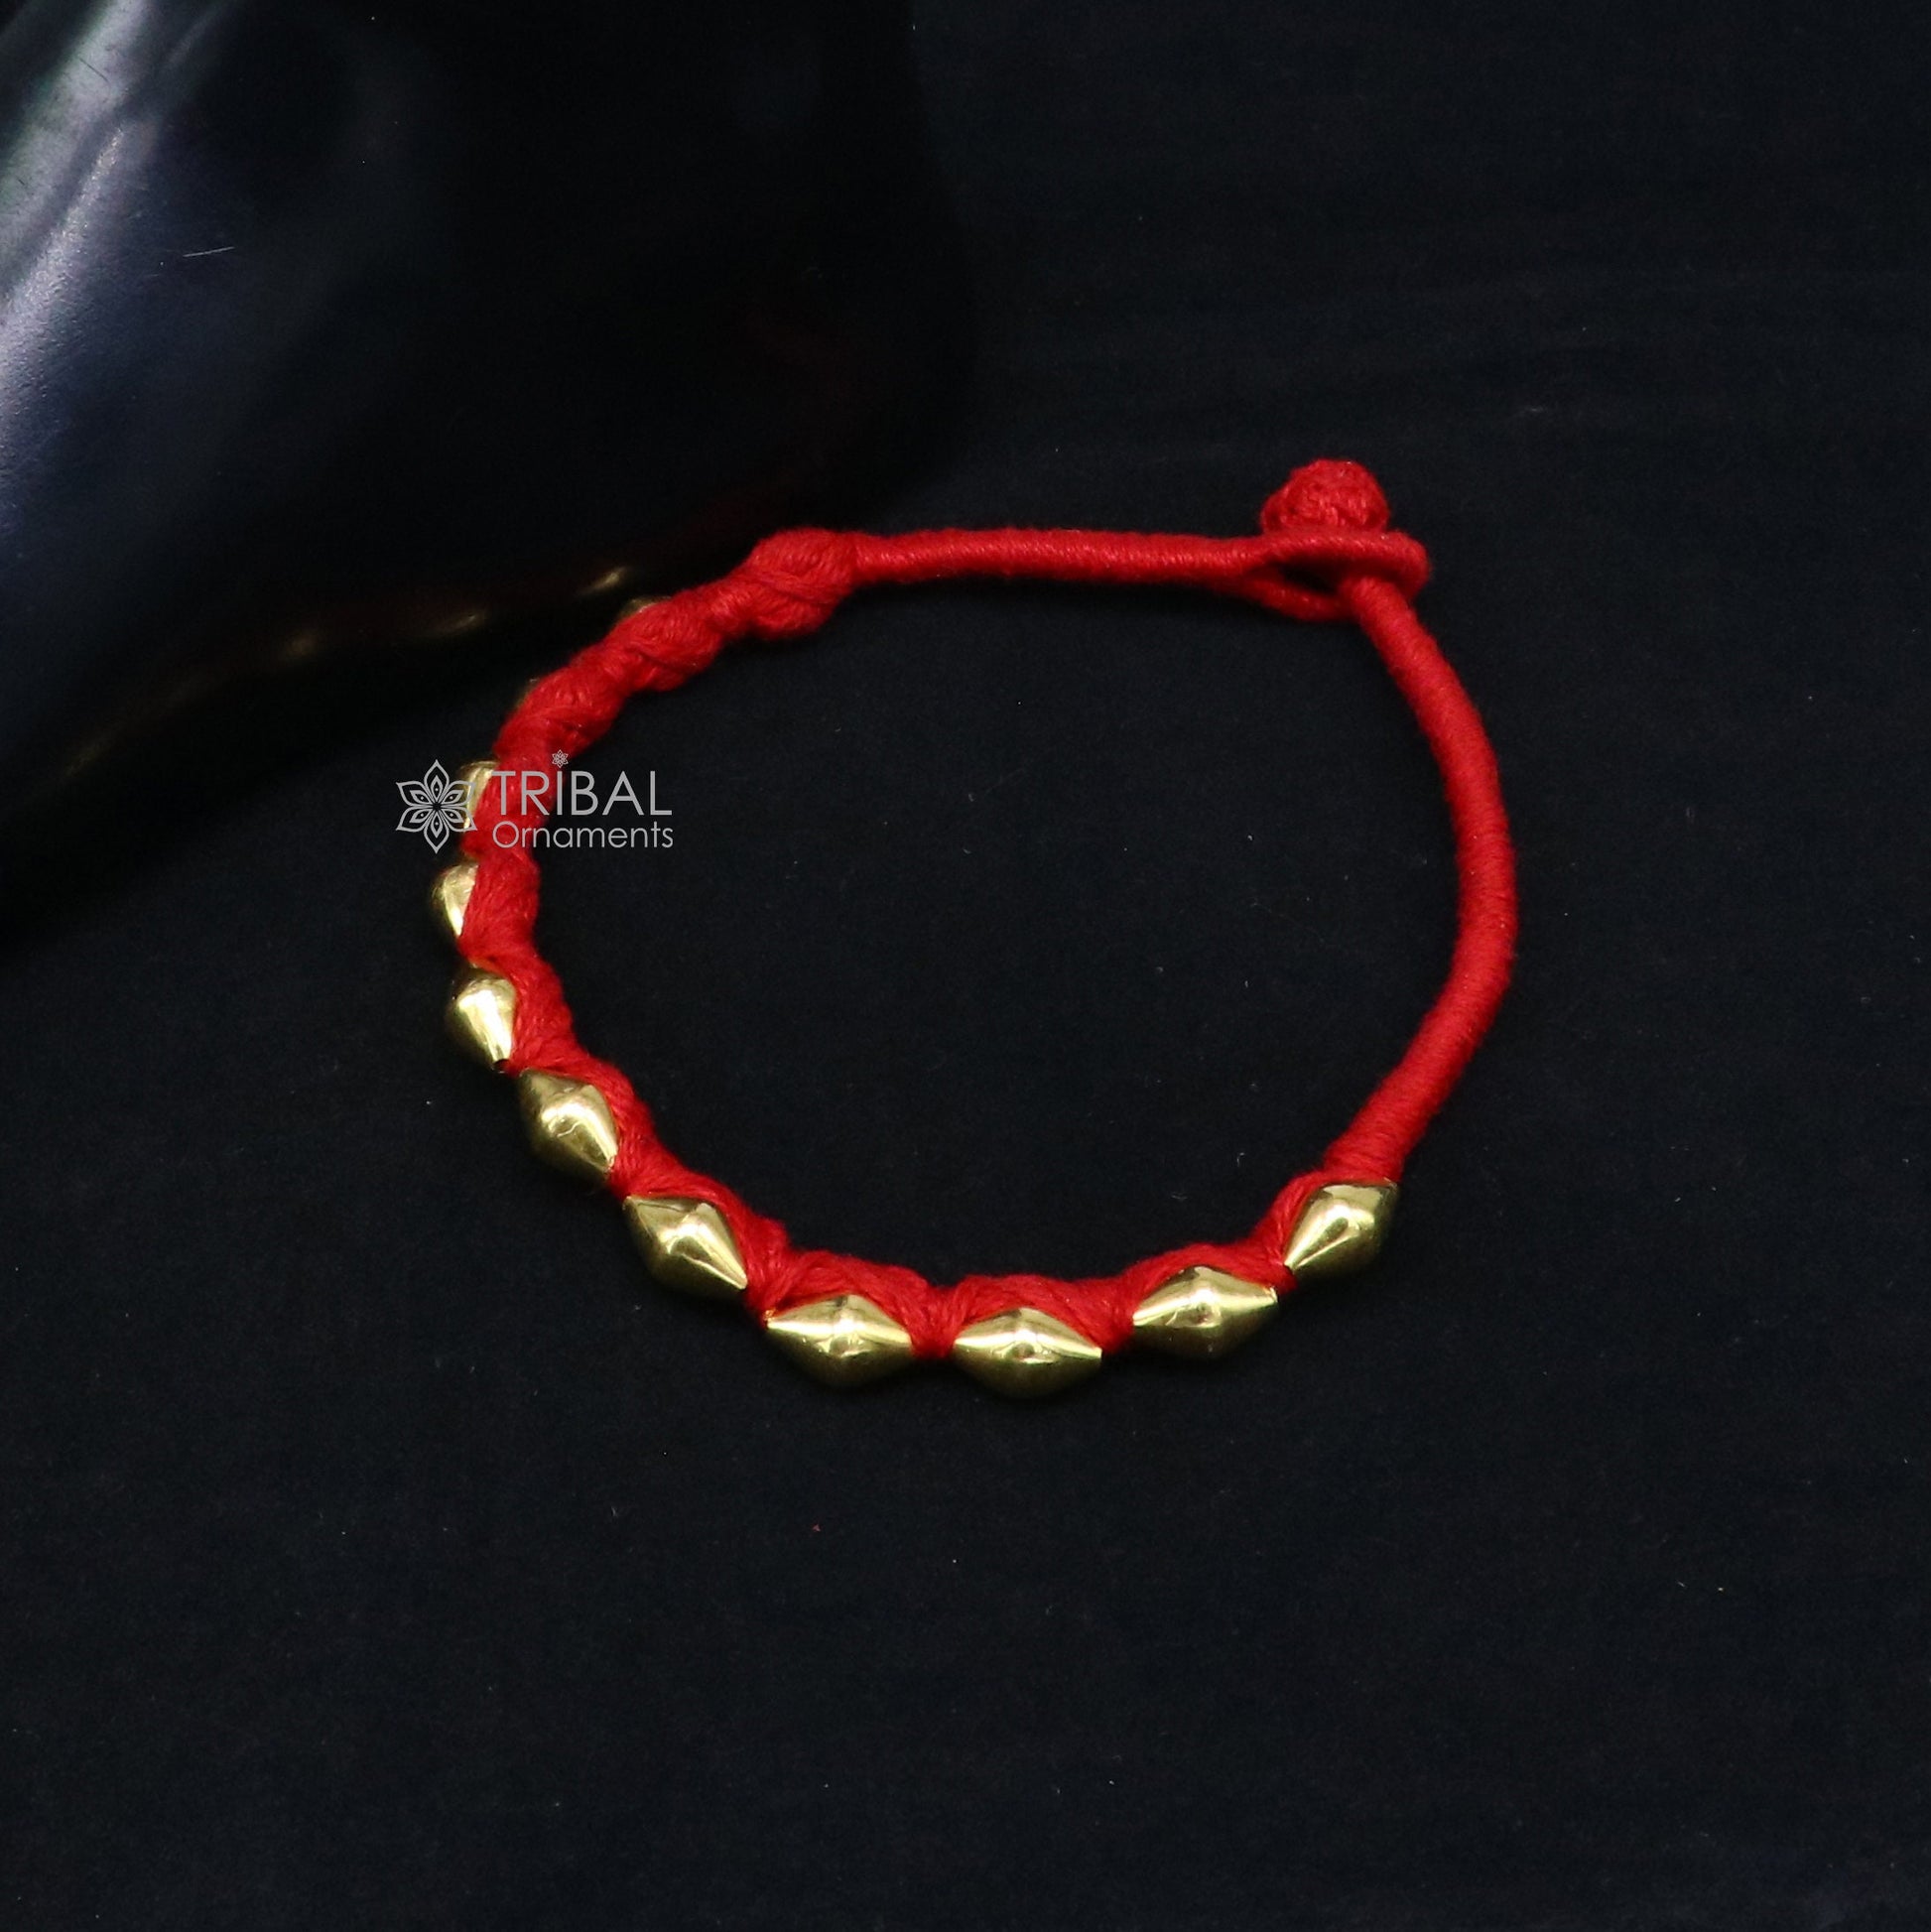 22kt yellow gold handmade Dholki beads oval shape beads customized threads anklet or bracelet best cultural ethnic tribal jewelry gbr81 - TRIBAL ORNAMENTS